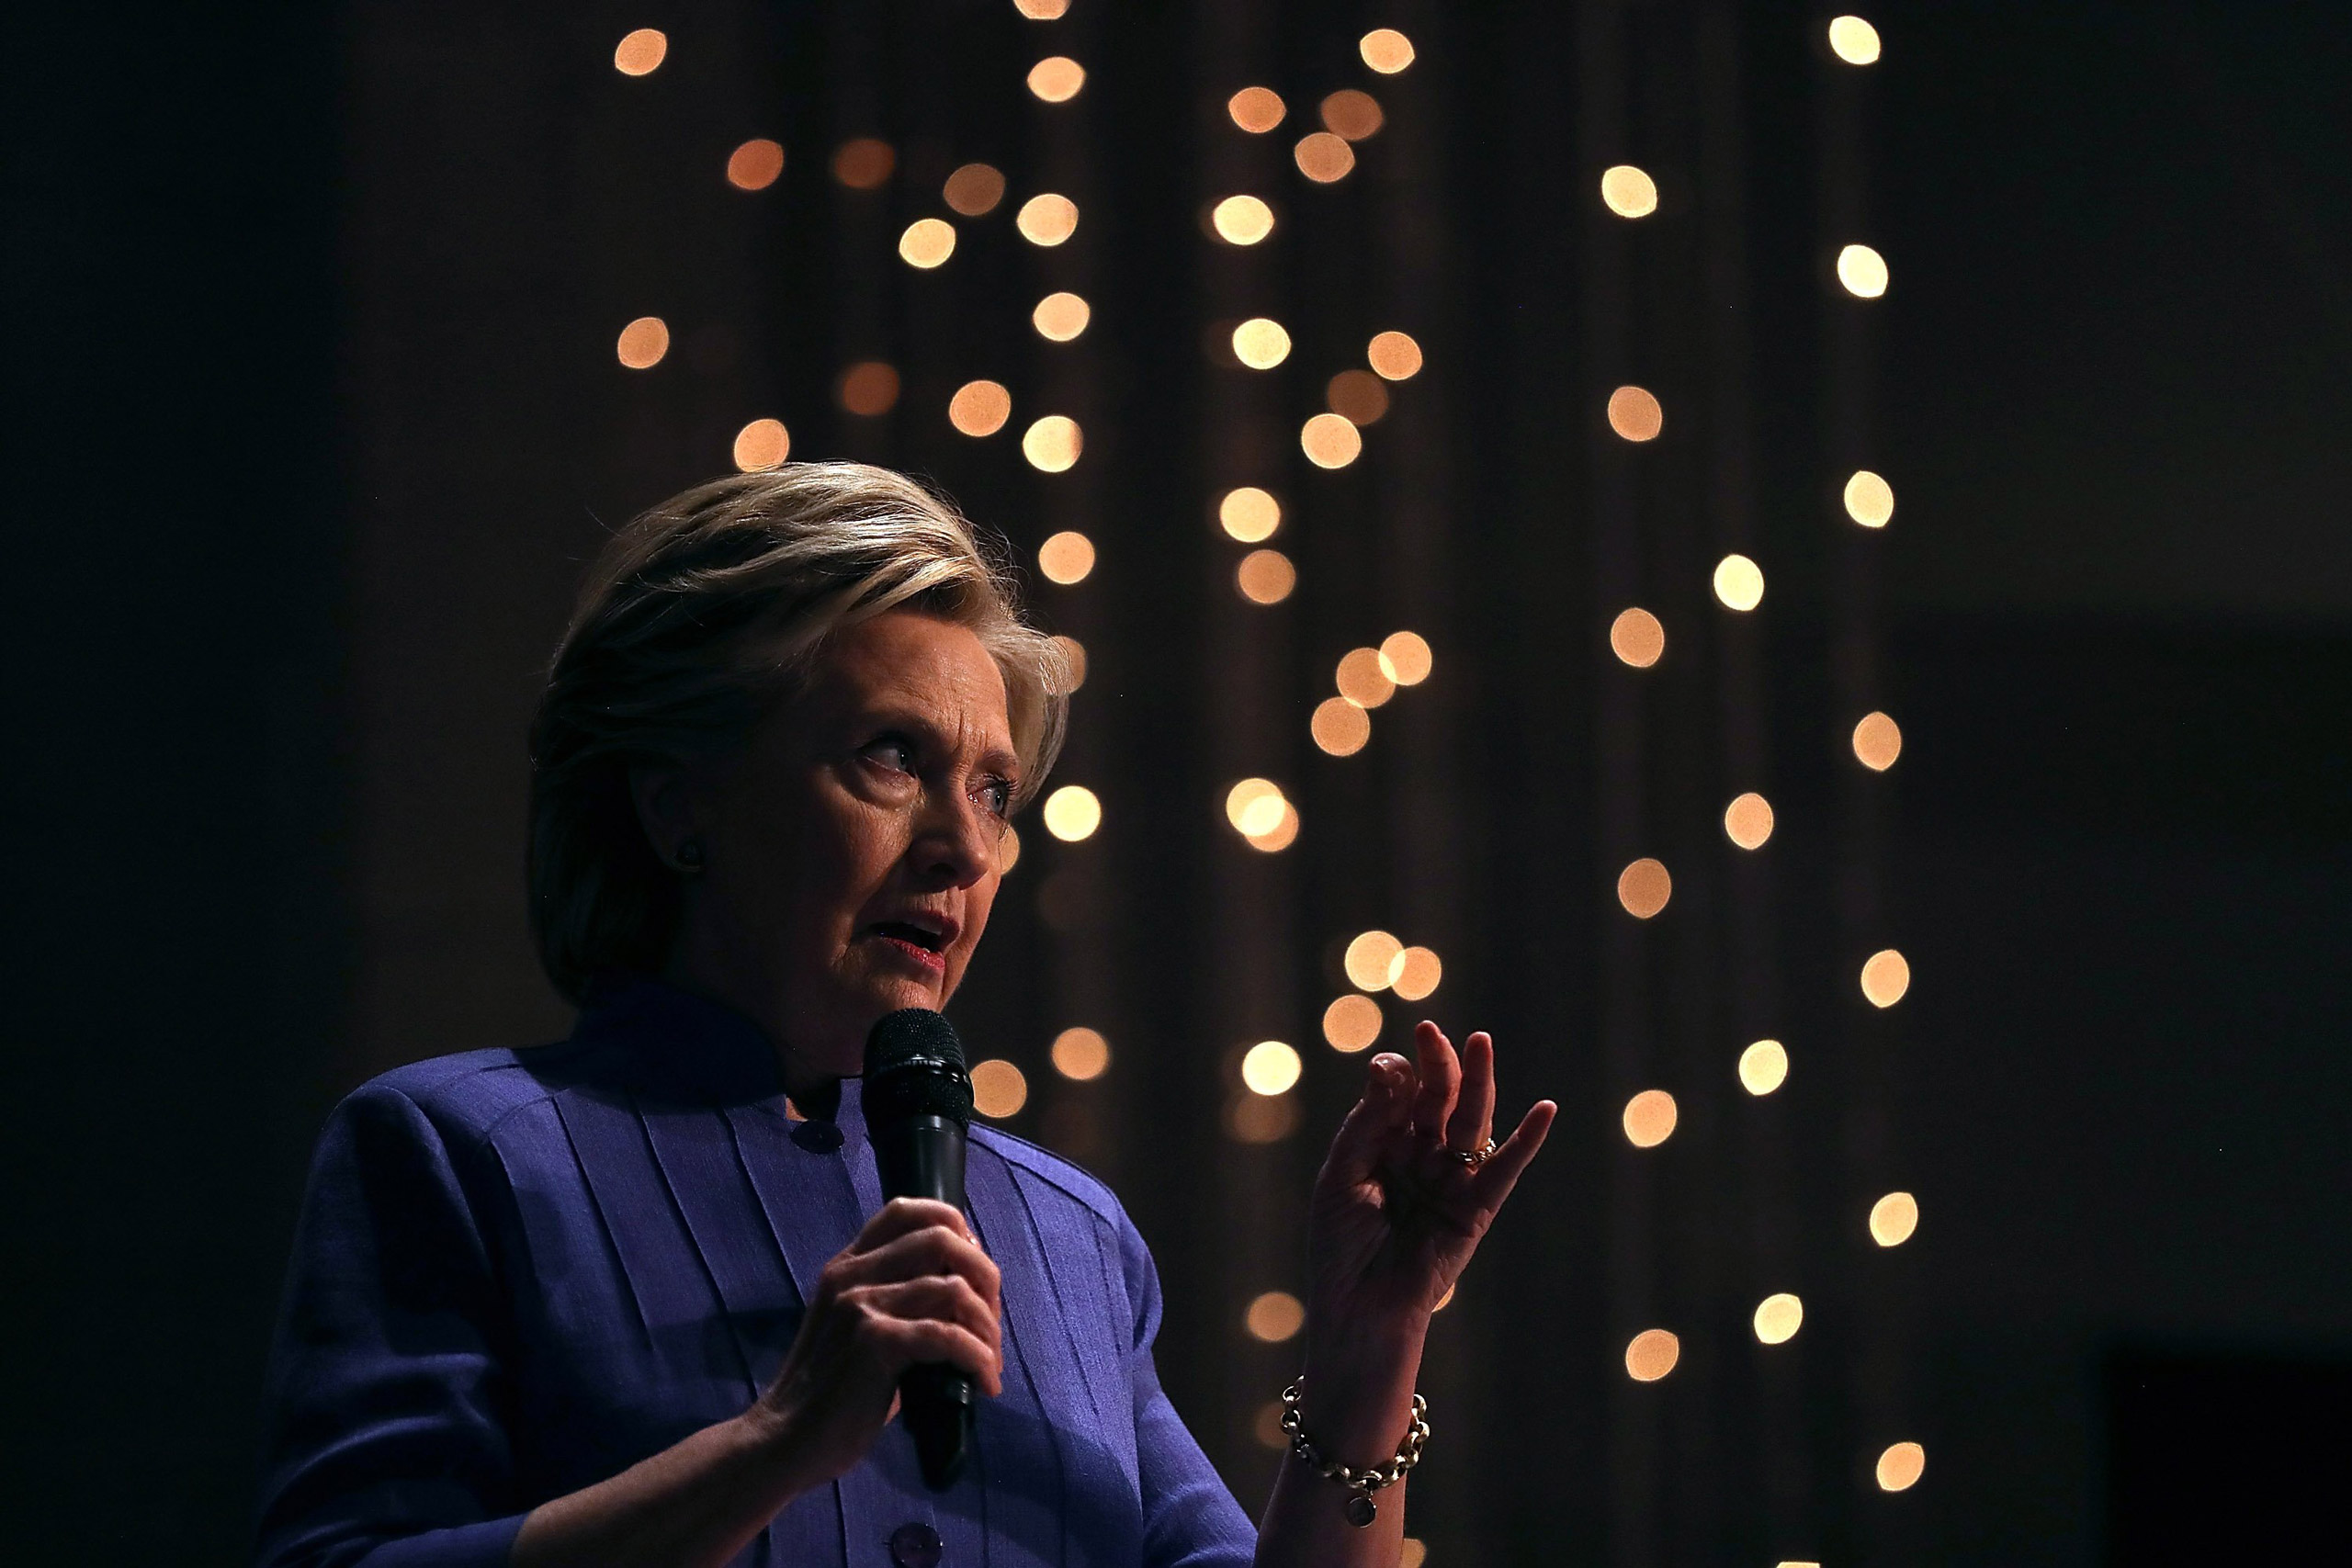 Democratic presidential nominee Hillary Clinton speaks during church services at New Mount Olive Baptist Church in Ft Lauderdale, Fla., on Oct. 30, 2016. (Justin Sullivan—Getty Images)